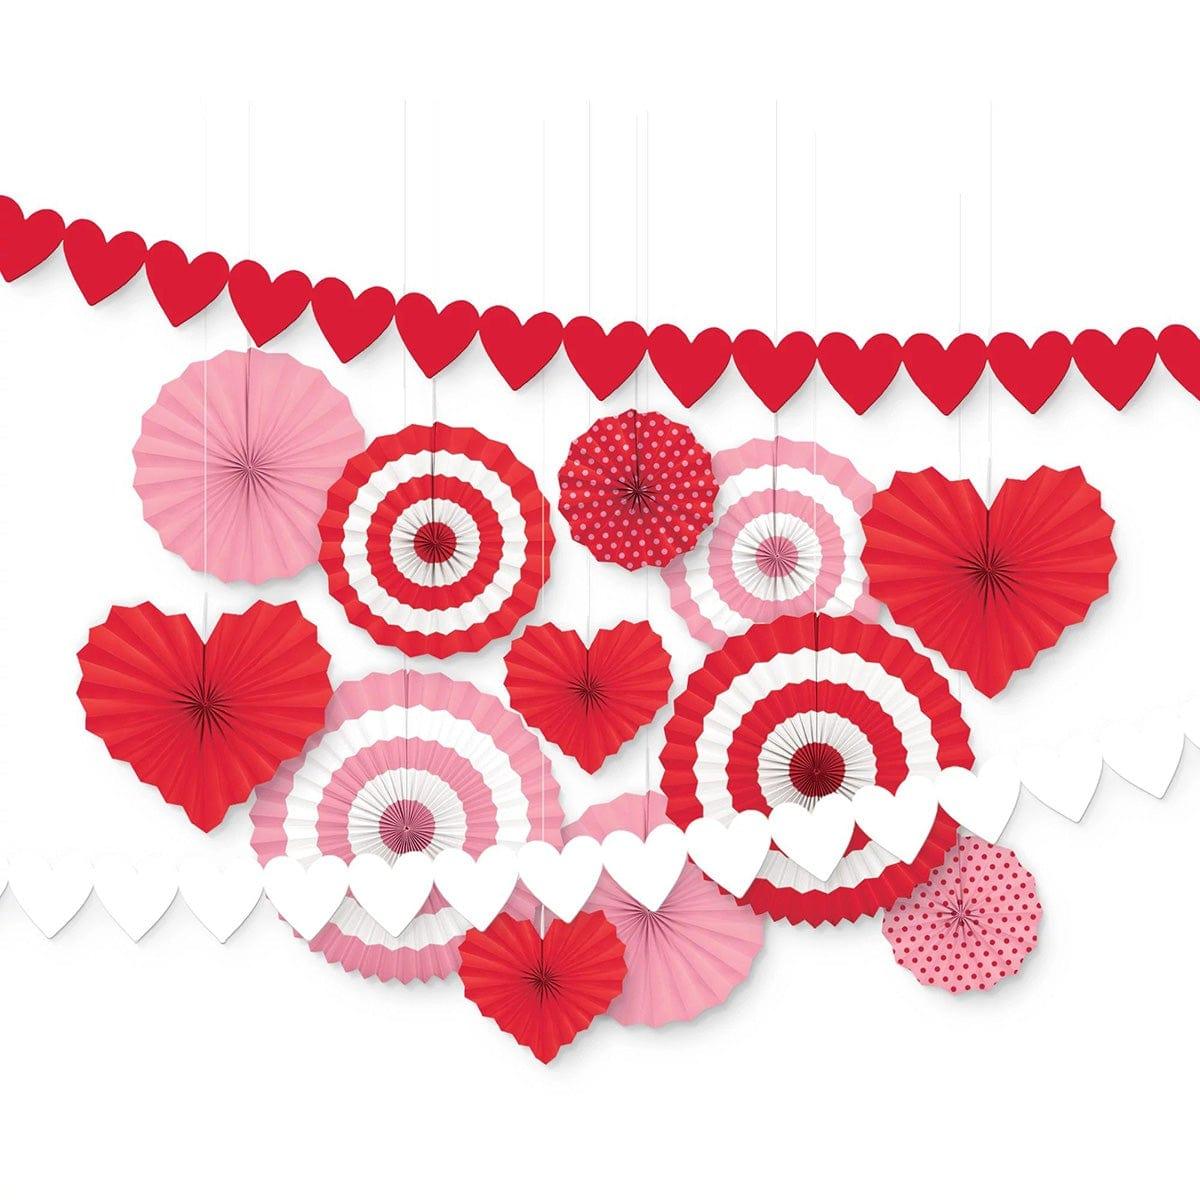 AMSCAN CA Valentine's Day Valentine's Day Fan Decorating Kit, 14 Count